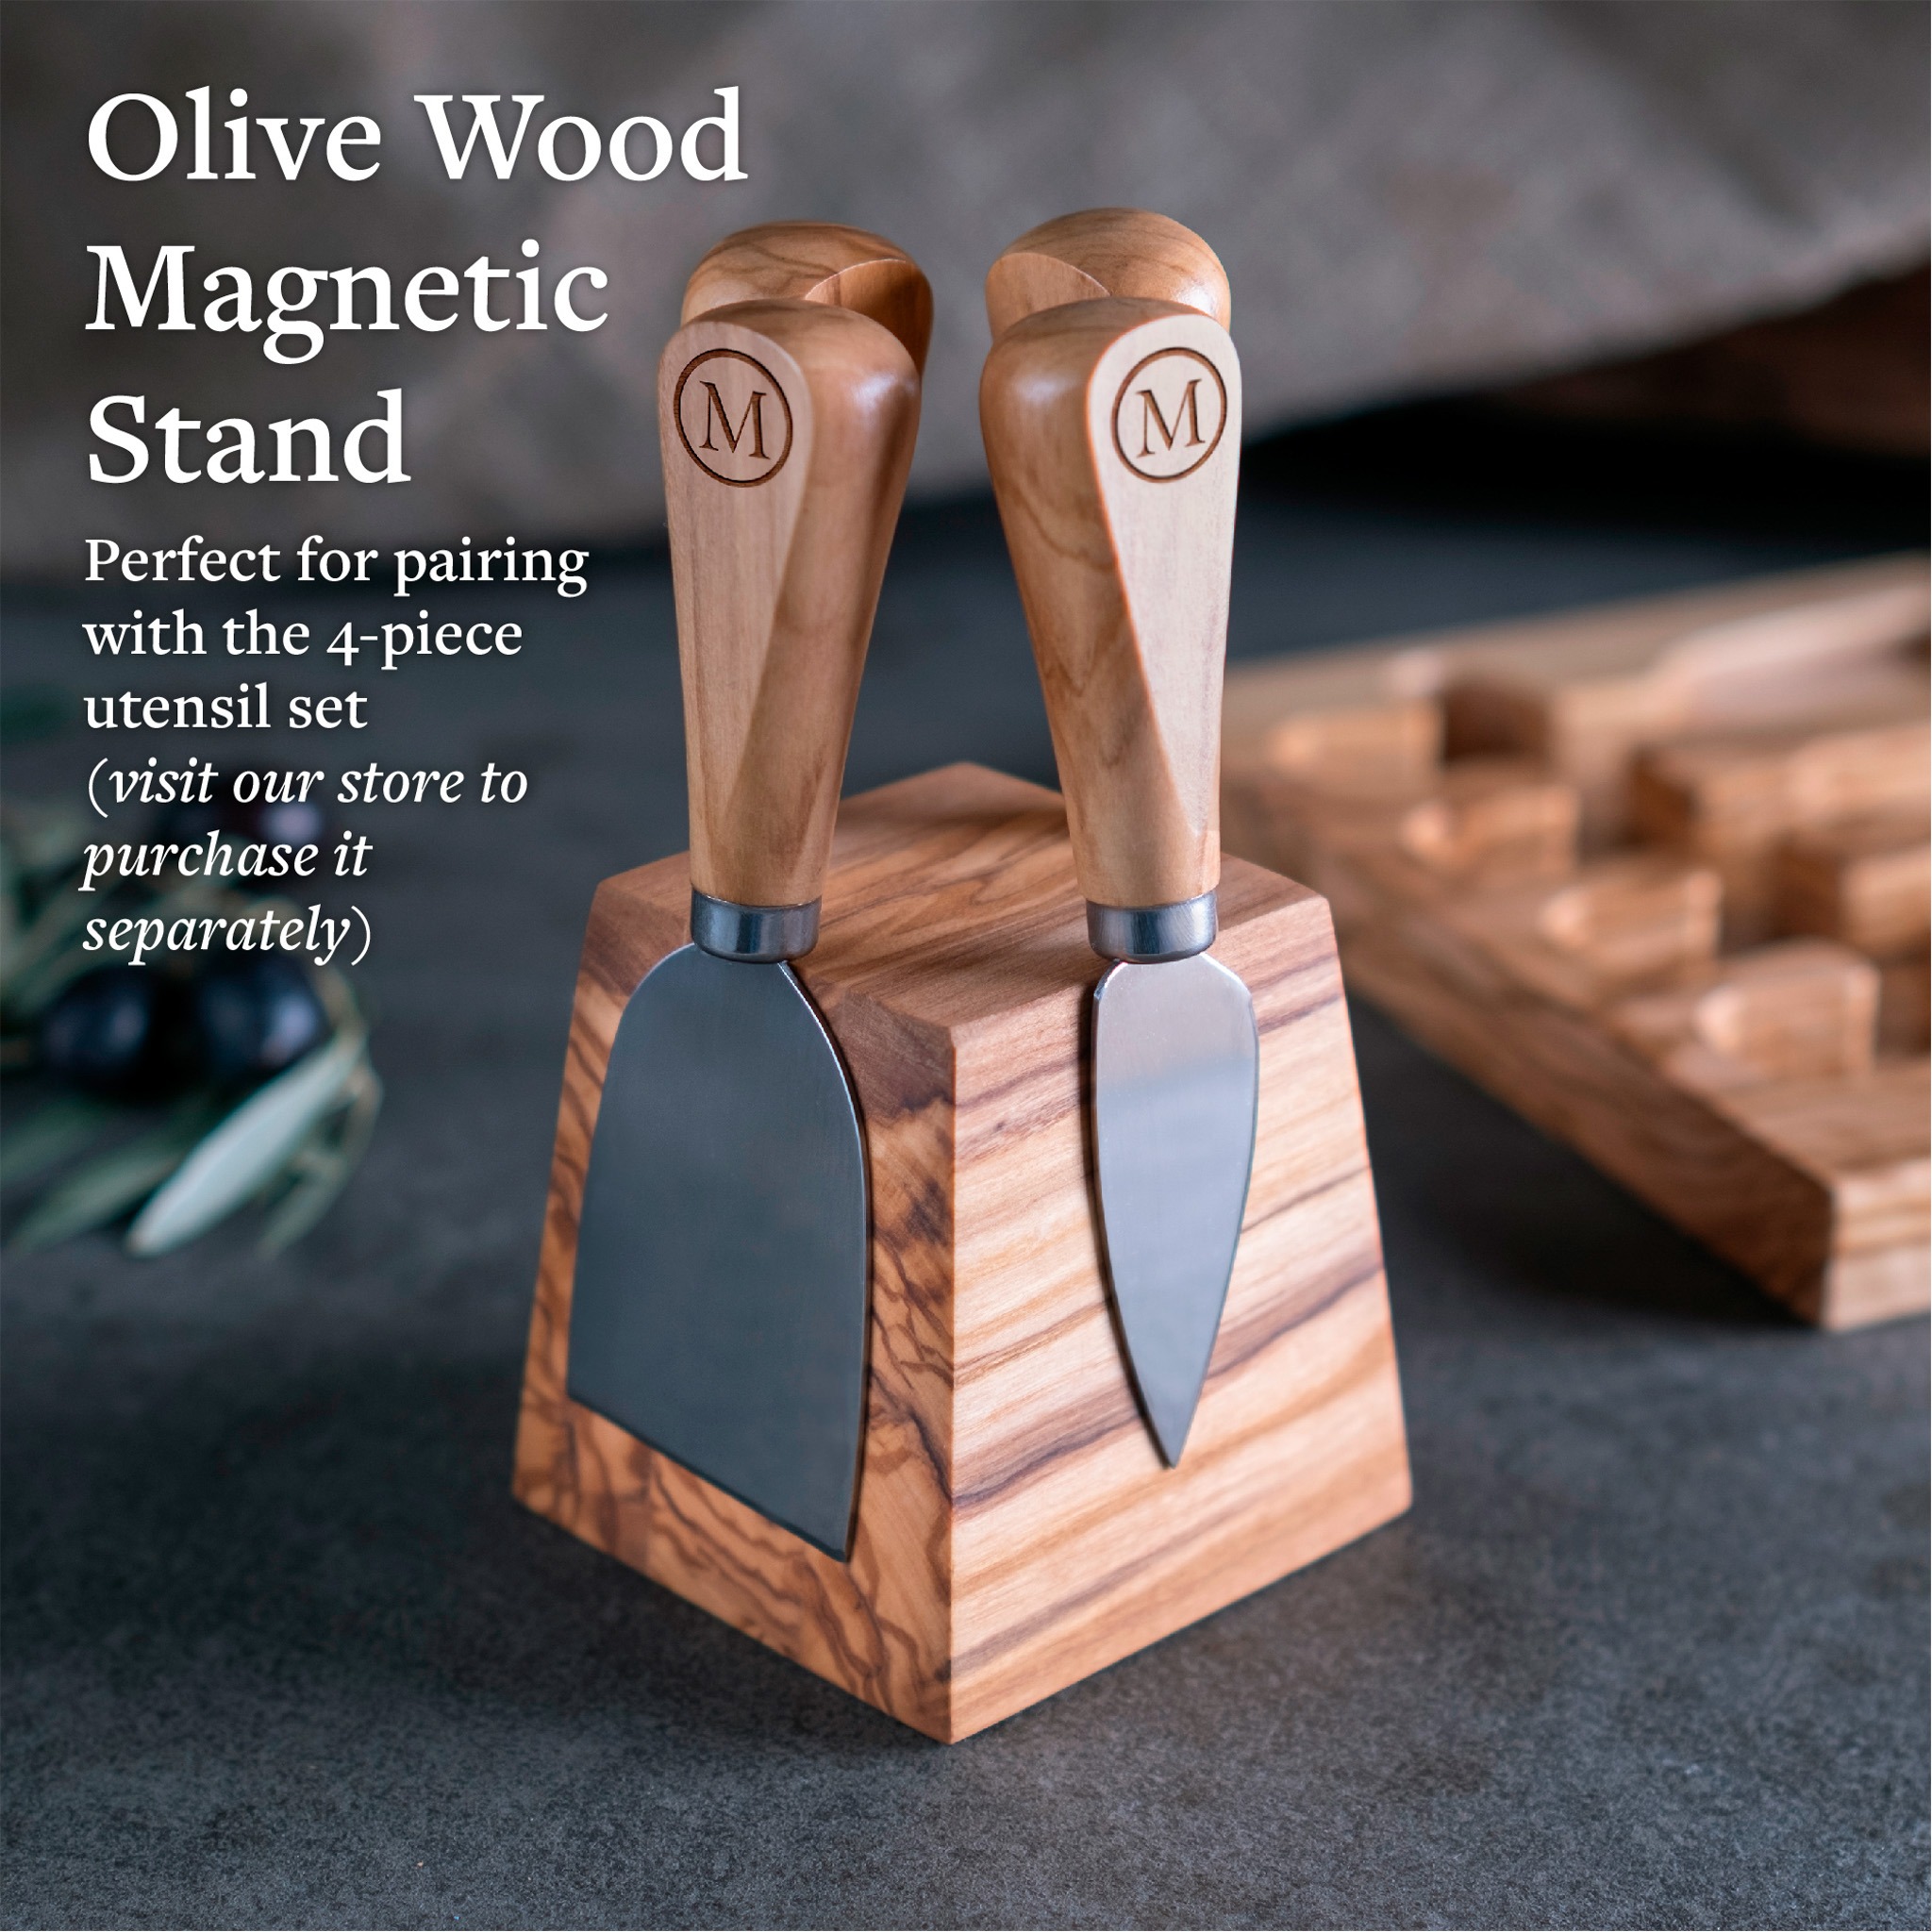 A Gift of Wood Wooden Steak Knife Block in Cherry and Walnut | Wisconsin Made